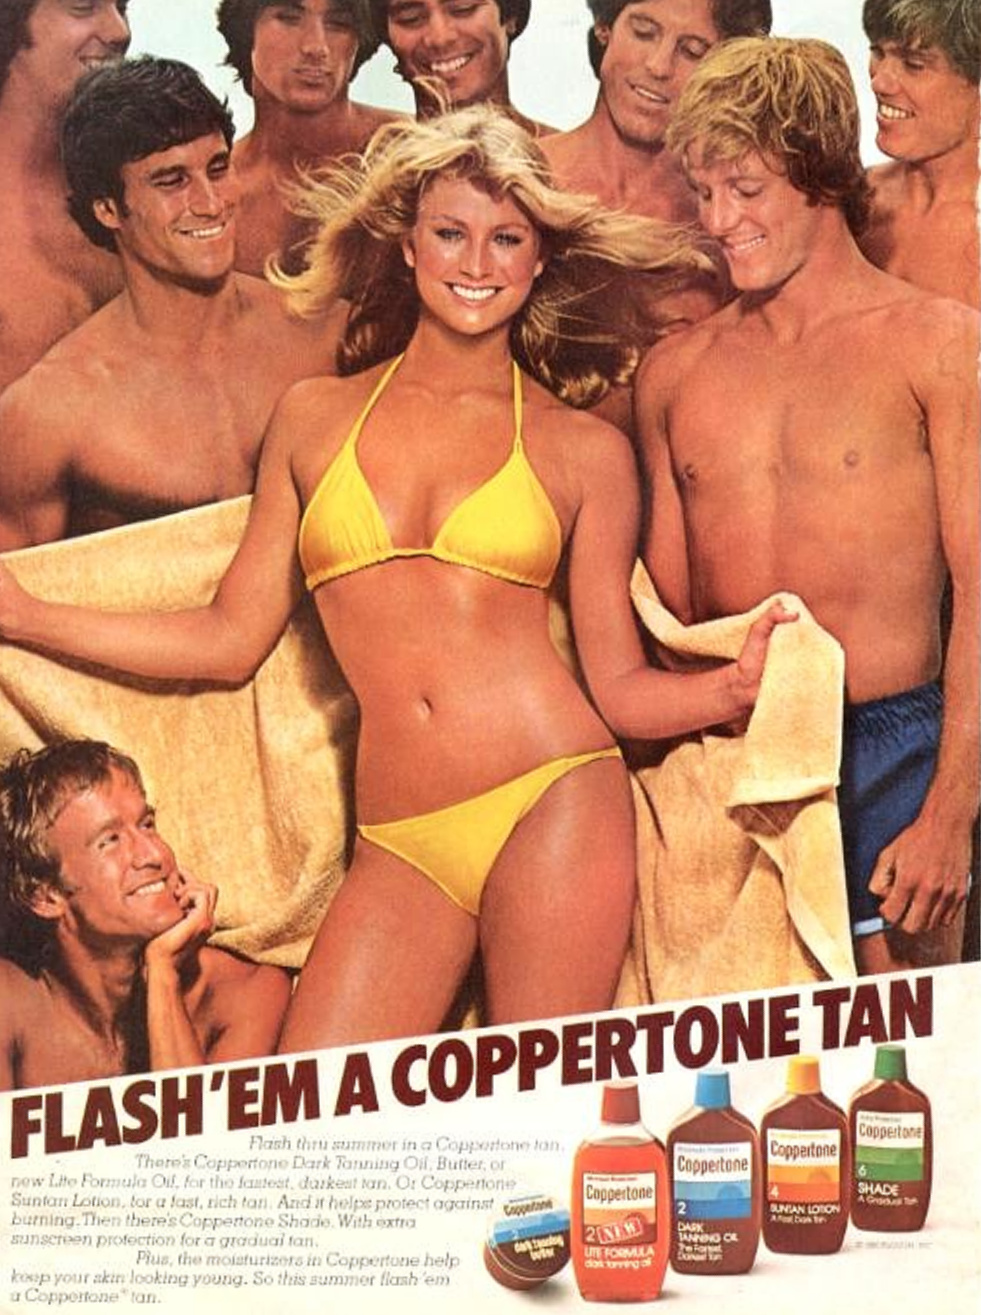 vintage Coppertone suntan lotion ad from the early 1980's. It shows a blonde woman in a yellow string bikini and a dark tan. She is surrounded by several tan men who are smiling at her. Text is Flash 'em a Coppertone Tan